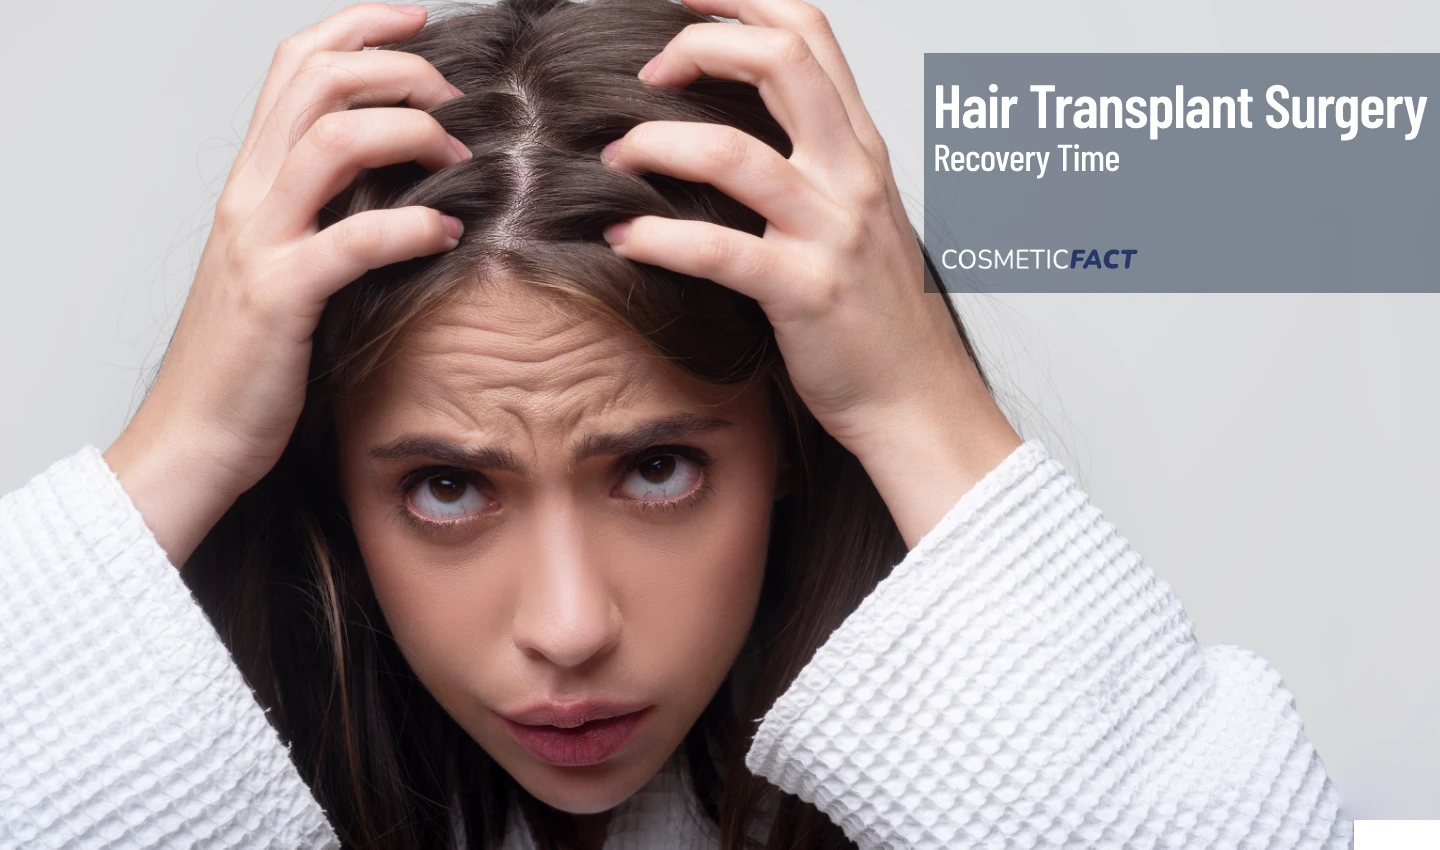 Image of a worried woman touching her loose hair, representing the emotional impact of hair loss and the importance of recovery time after hair loss treatment.